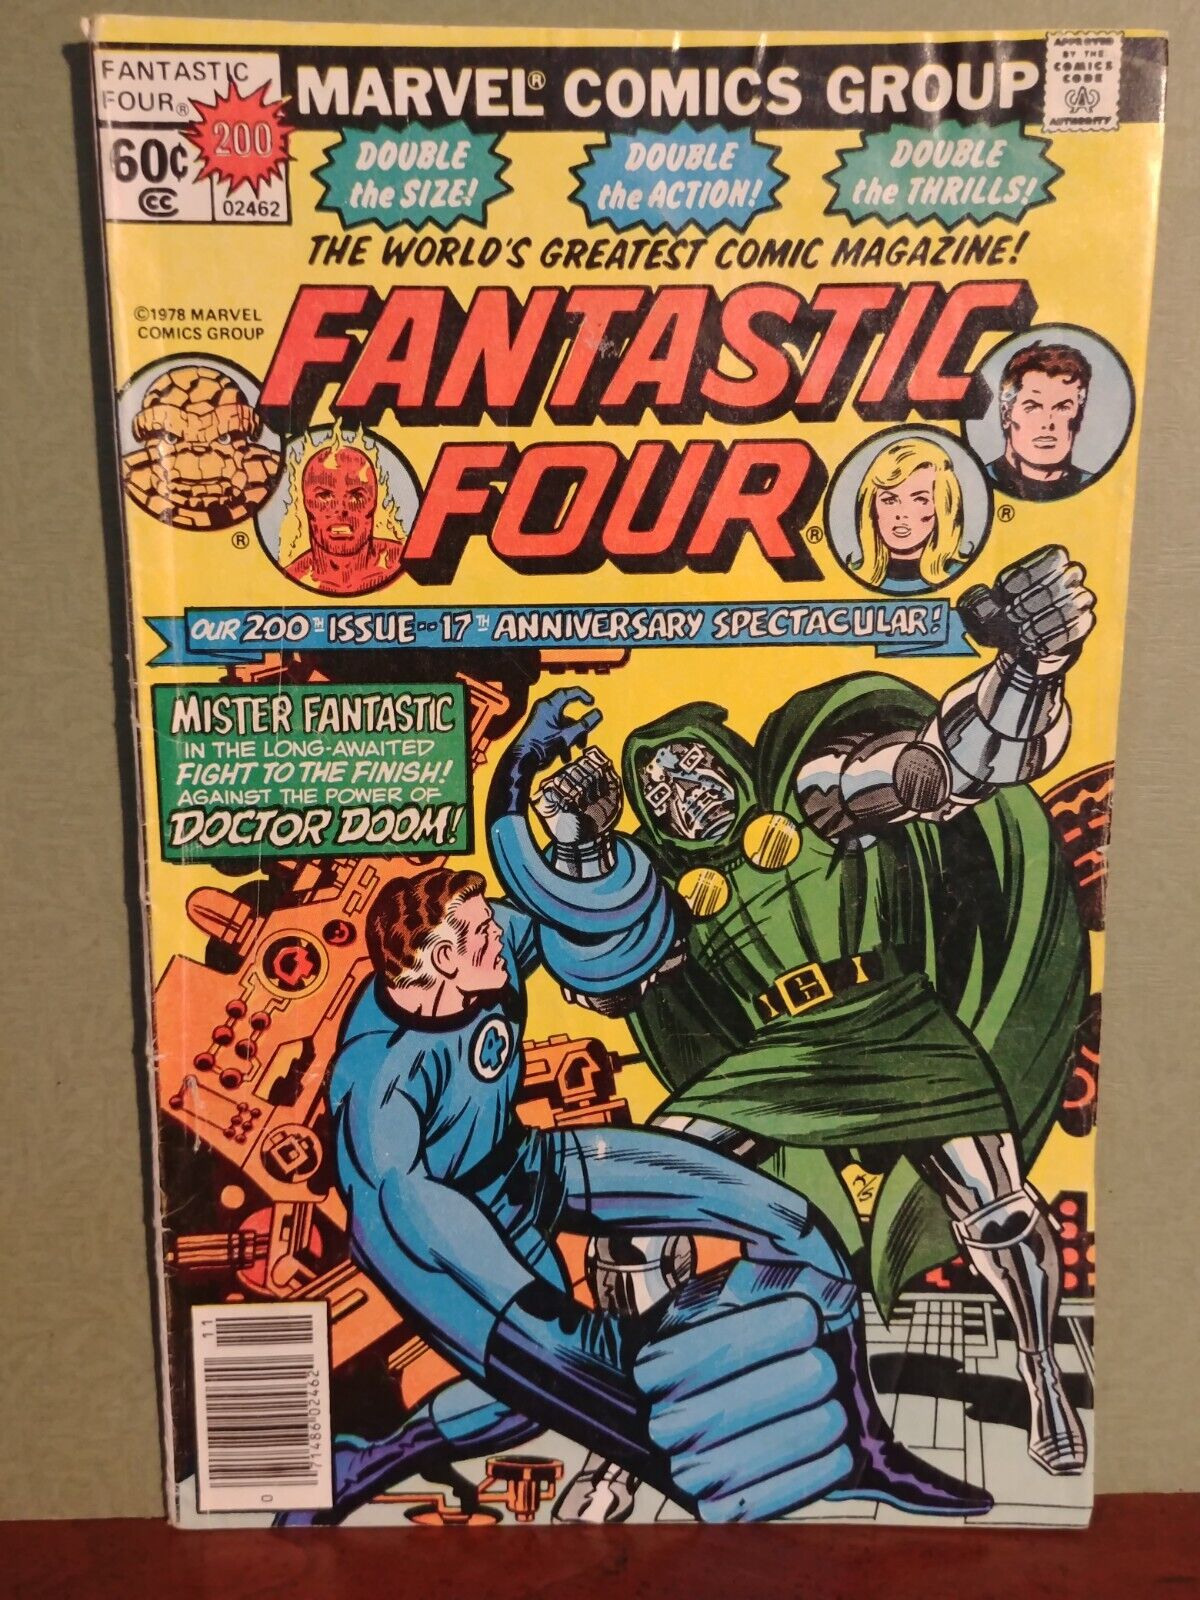  Fantastic Four 17th Anniversary Issue #200 Comic Doctor Doom  1978  4.5